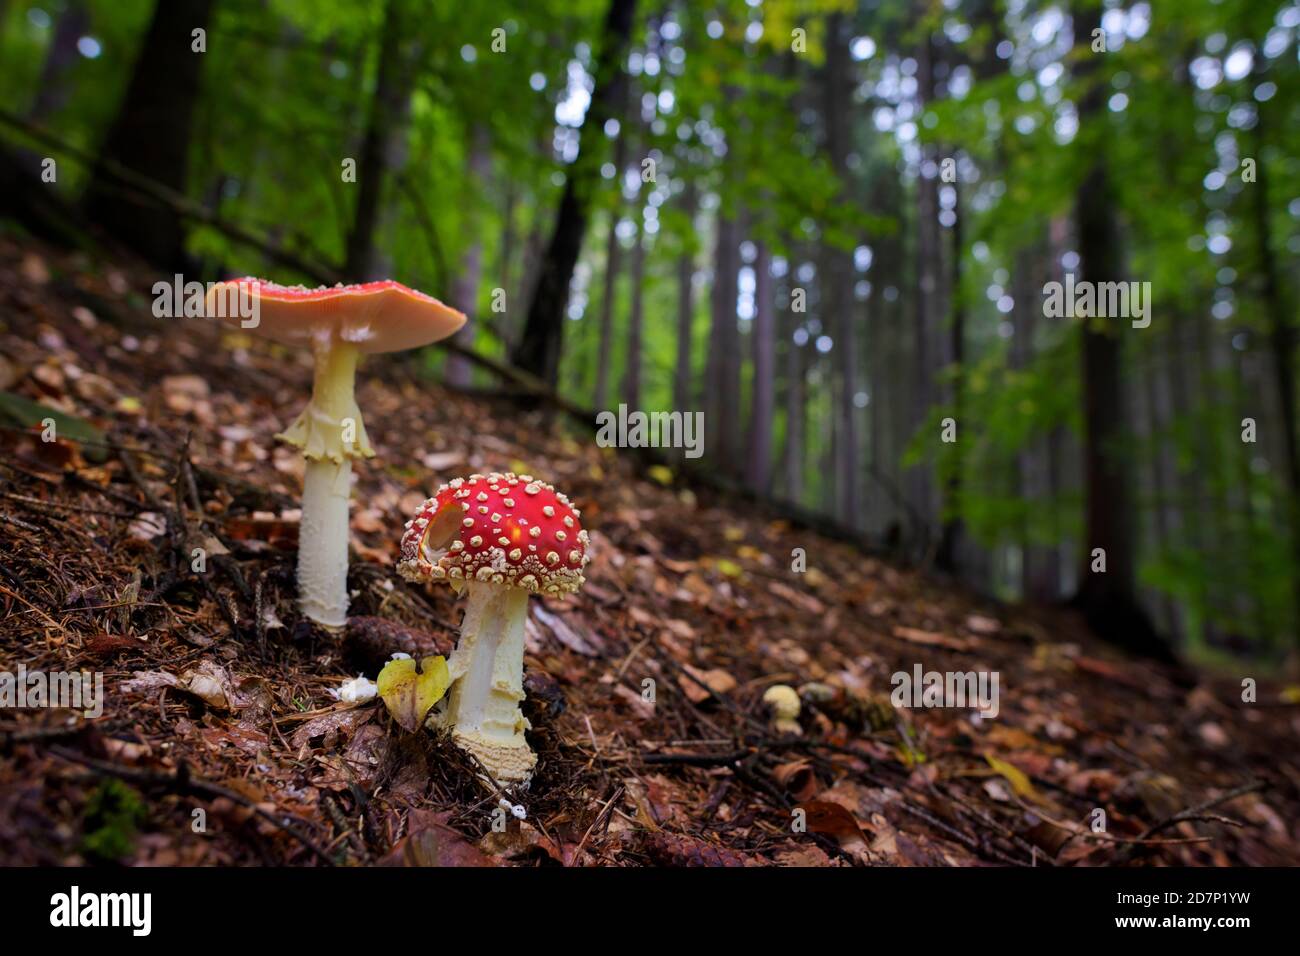 Fly Agaric mushroom - Amanita muscaria, beautiful red poisonous mushroom from European forests, Zlin, Czech Republic. Stock Photo